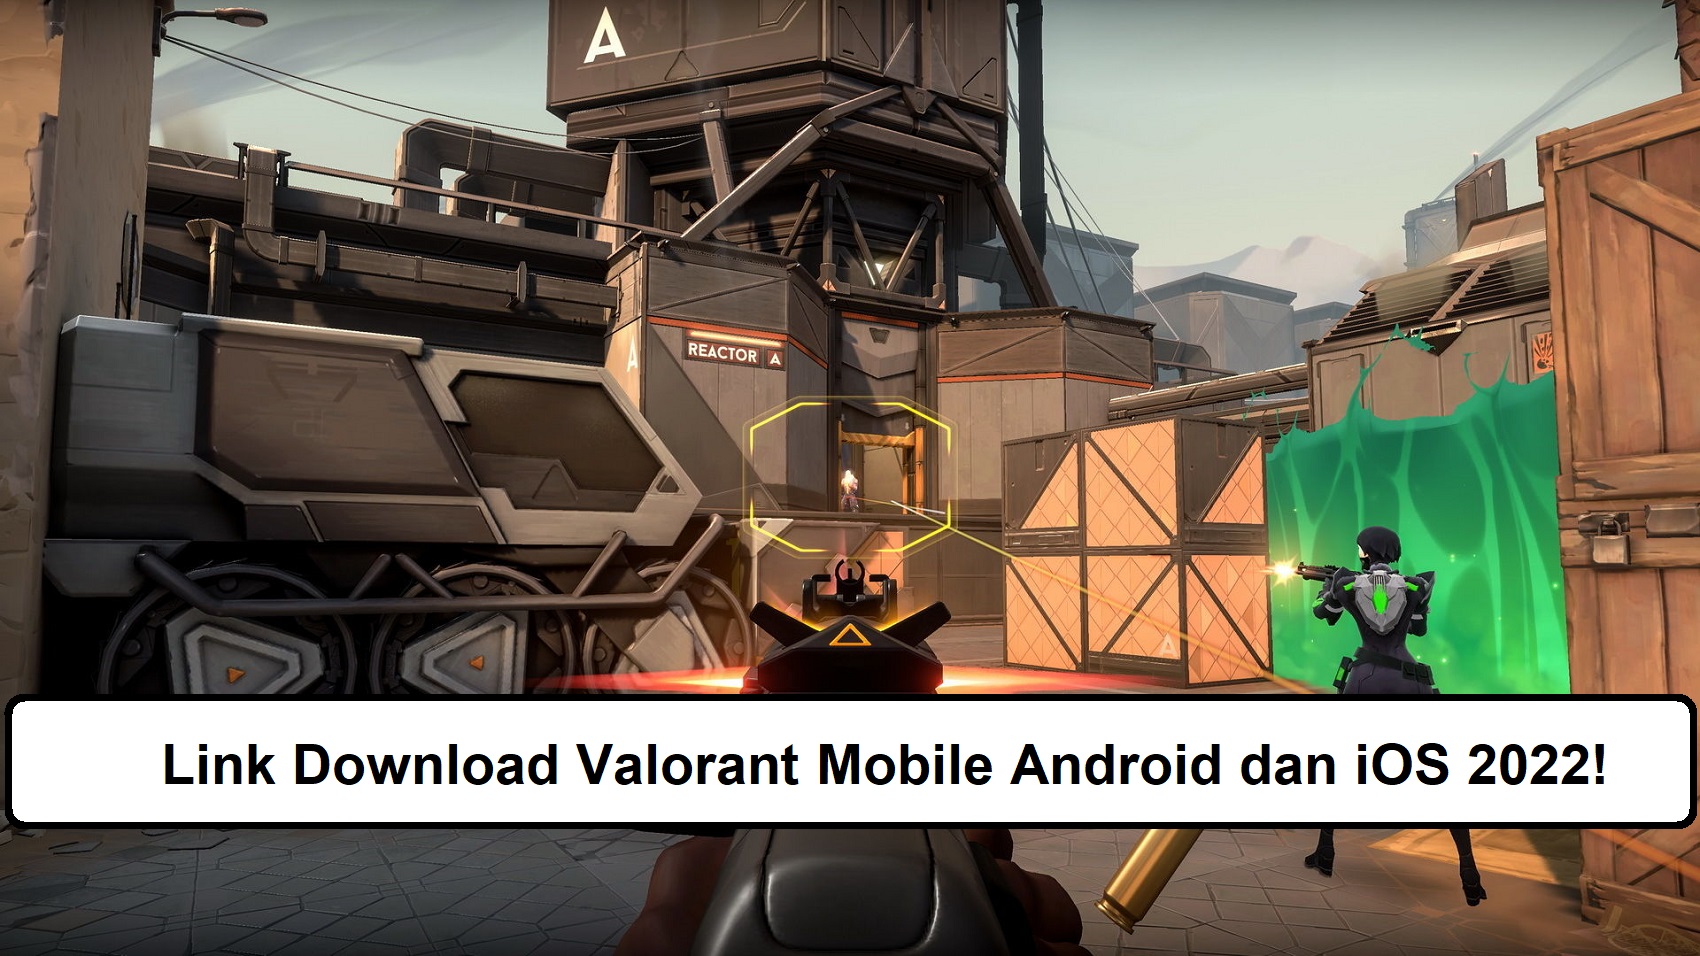 Link Download Valorant Mobile Android dan iOS 2022!